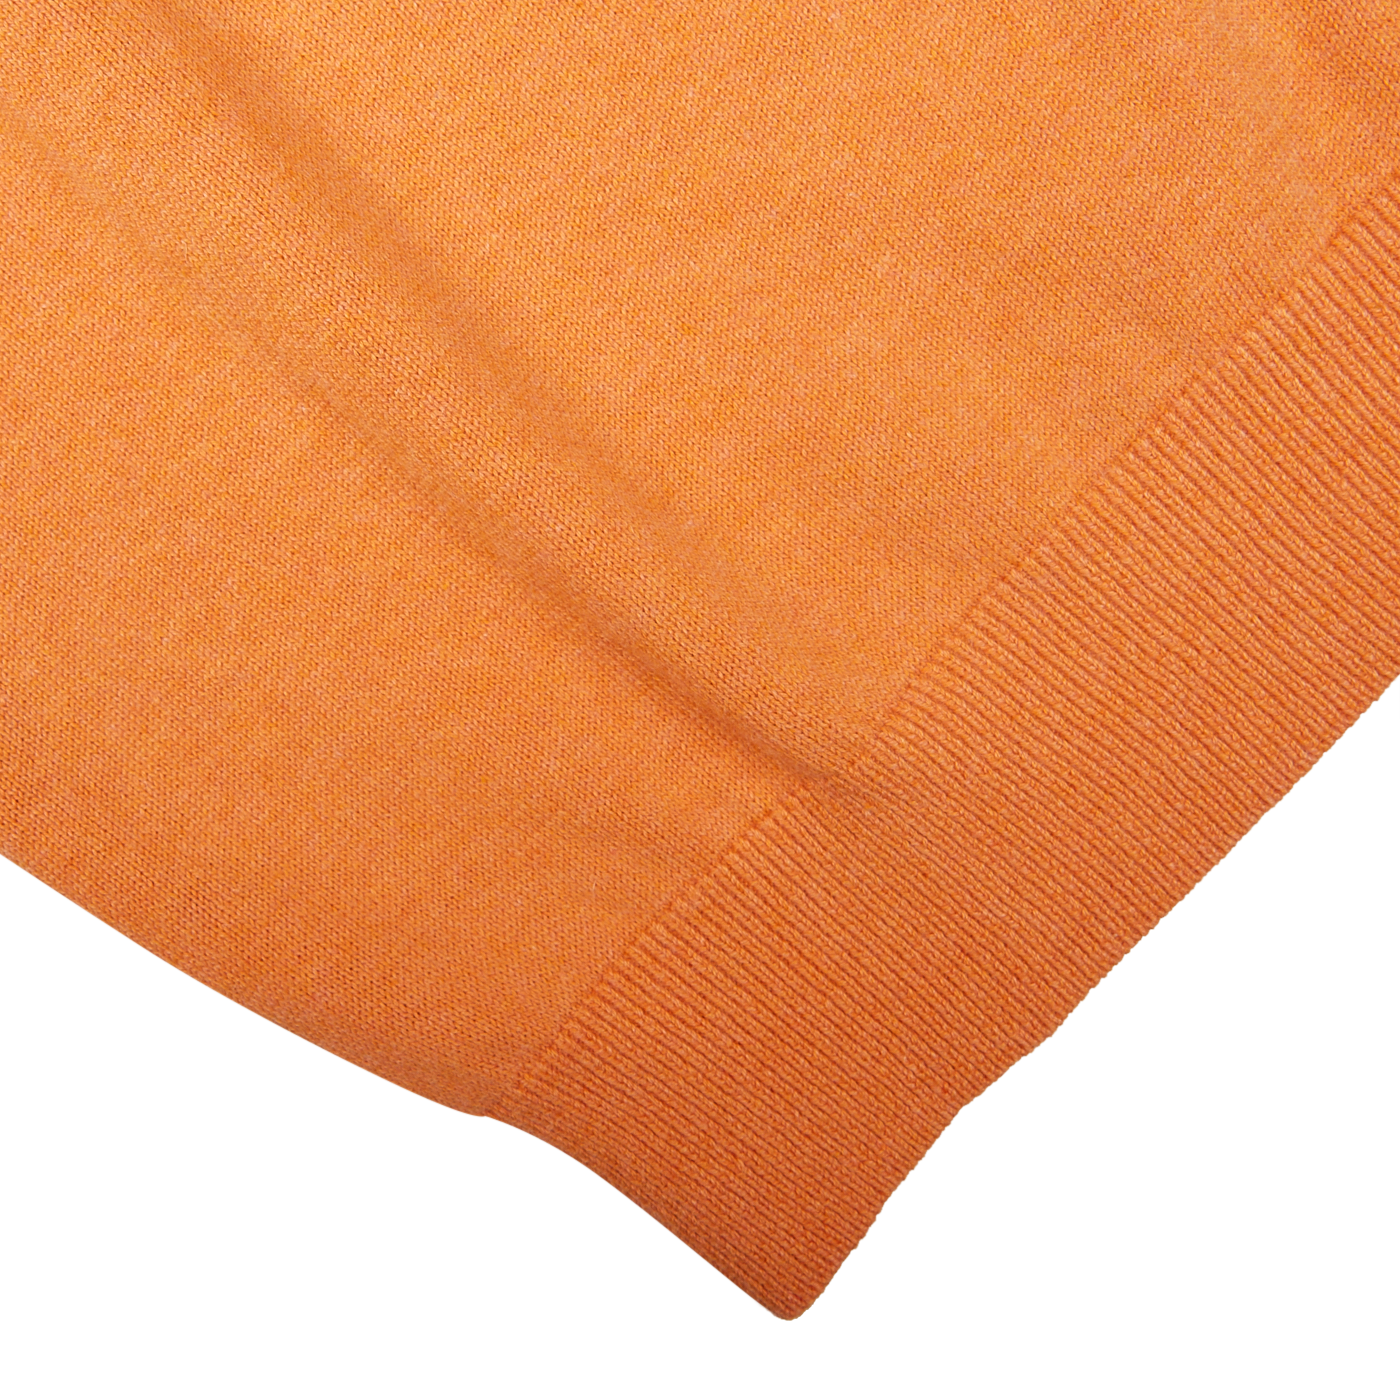 Close-up of a Blazing Orange Luxury Cotton Crewneck mixed with cashmere fabric with visible texture and hemming by Alan Paine.